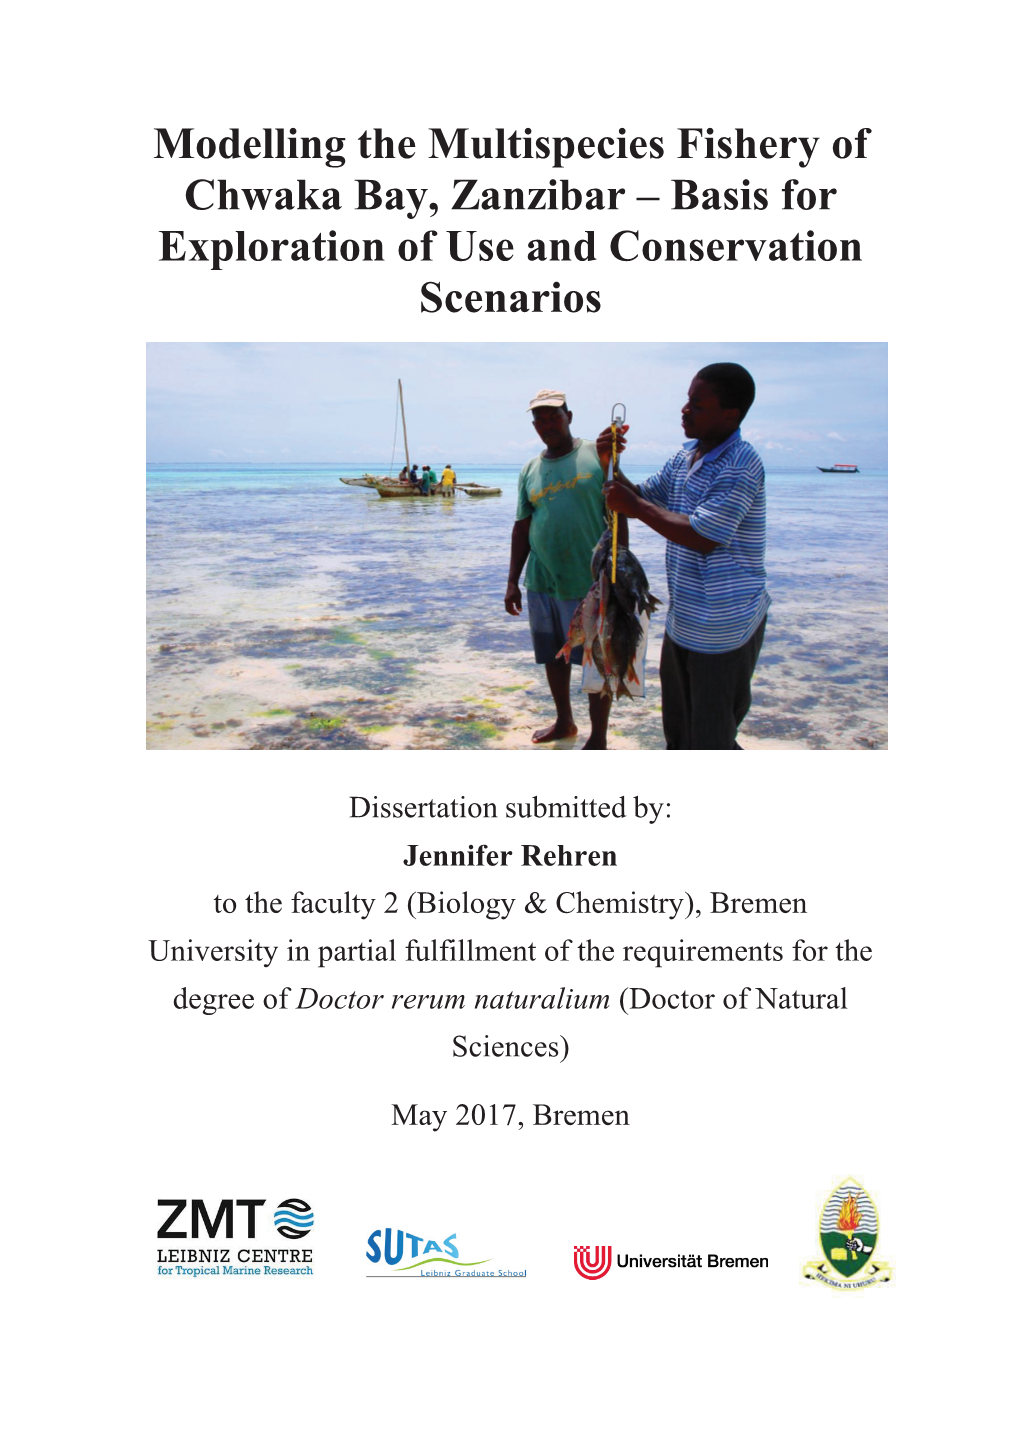 Modelling the Multispecies Fishery of Chwaka Bay, Zanzibar – Basis for Exploration of Use and Conservation Scenarios